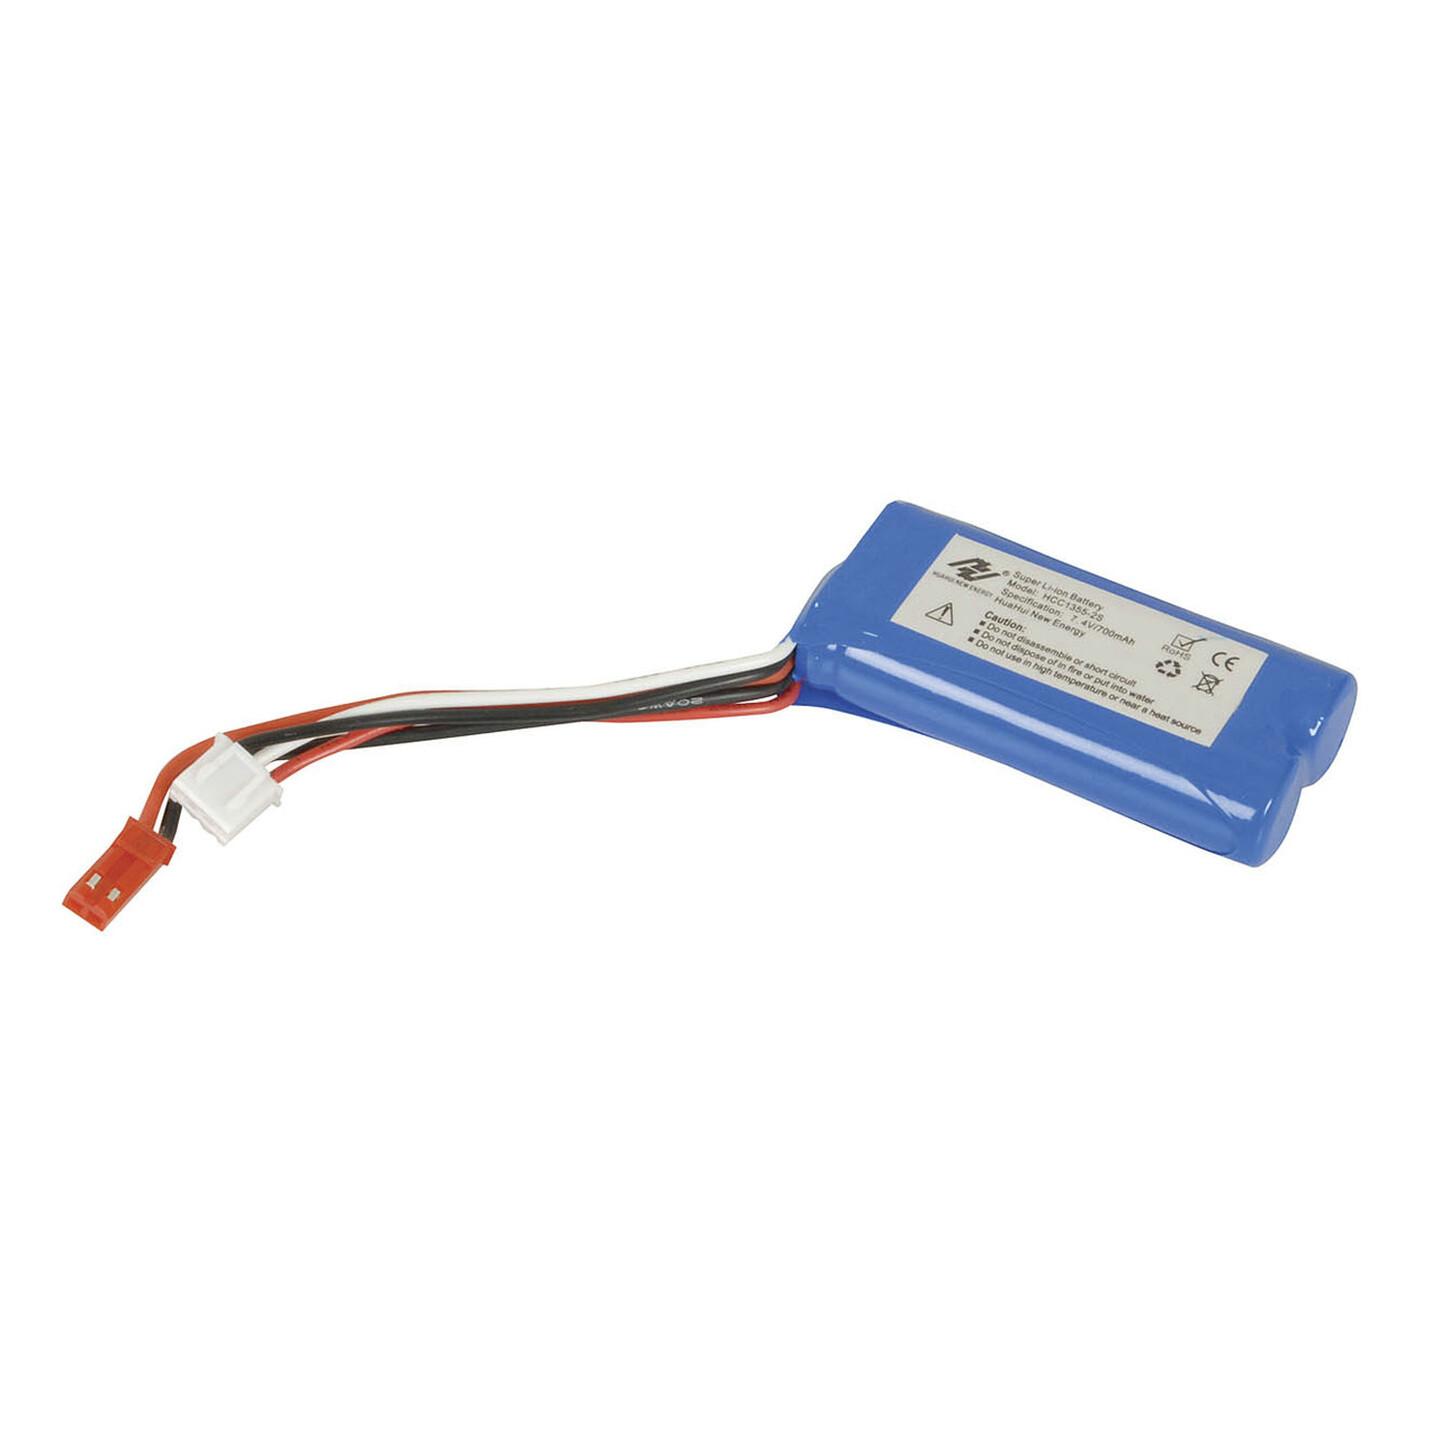 Spare Rechargeable LiPo Battery for GT-3490